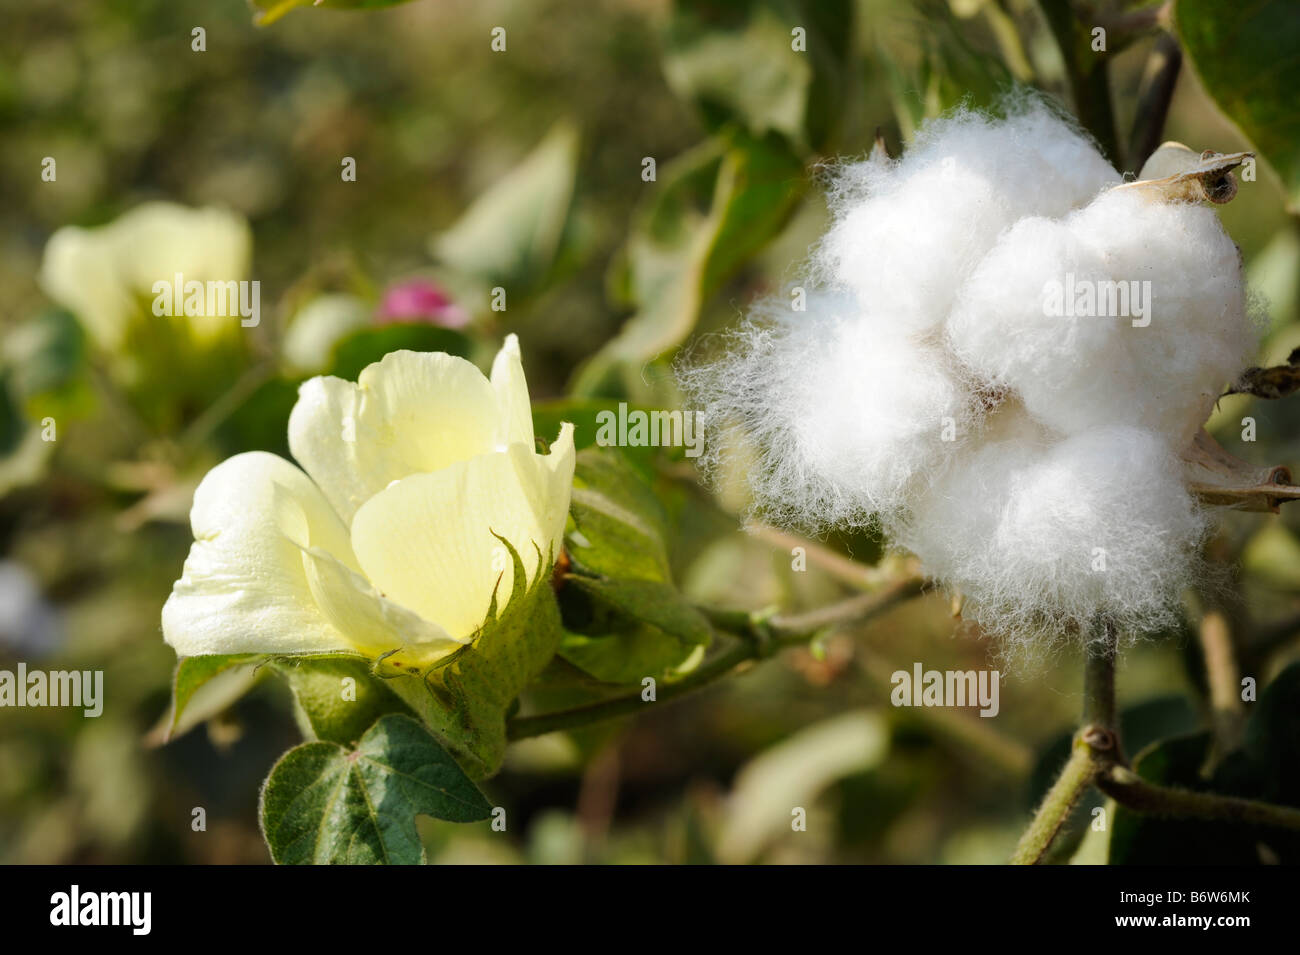 India M.P. Khargone , fair trade and organic cotton farming, yellow cotton flower and open boll formation with fibre Stock Photo